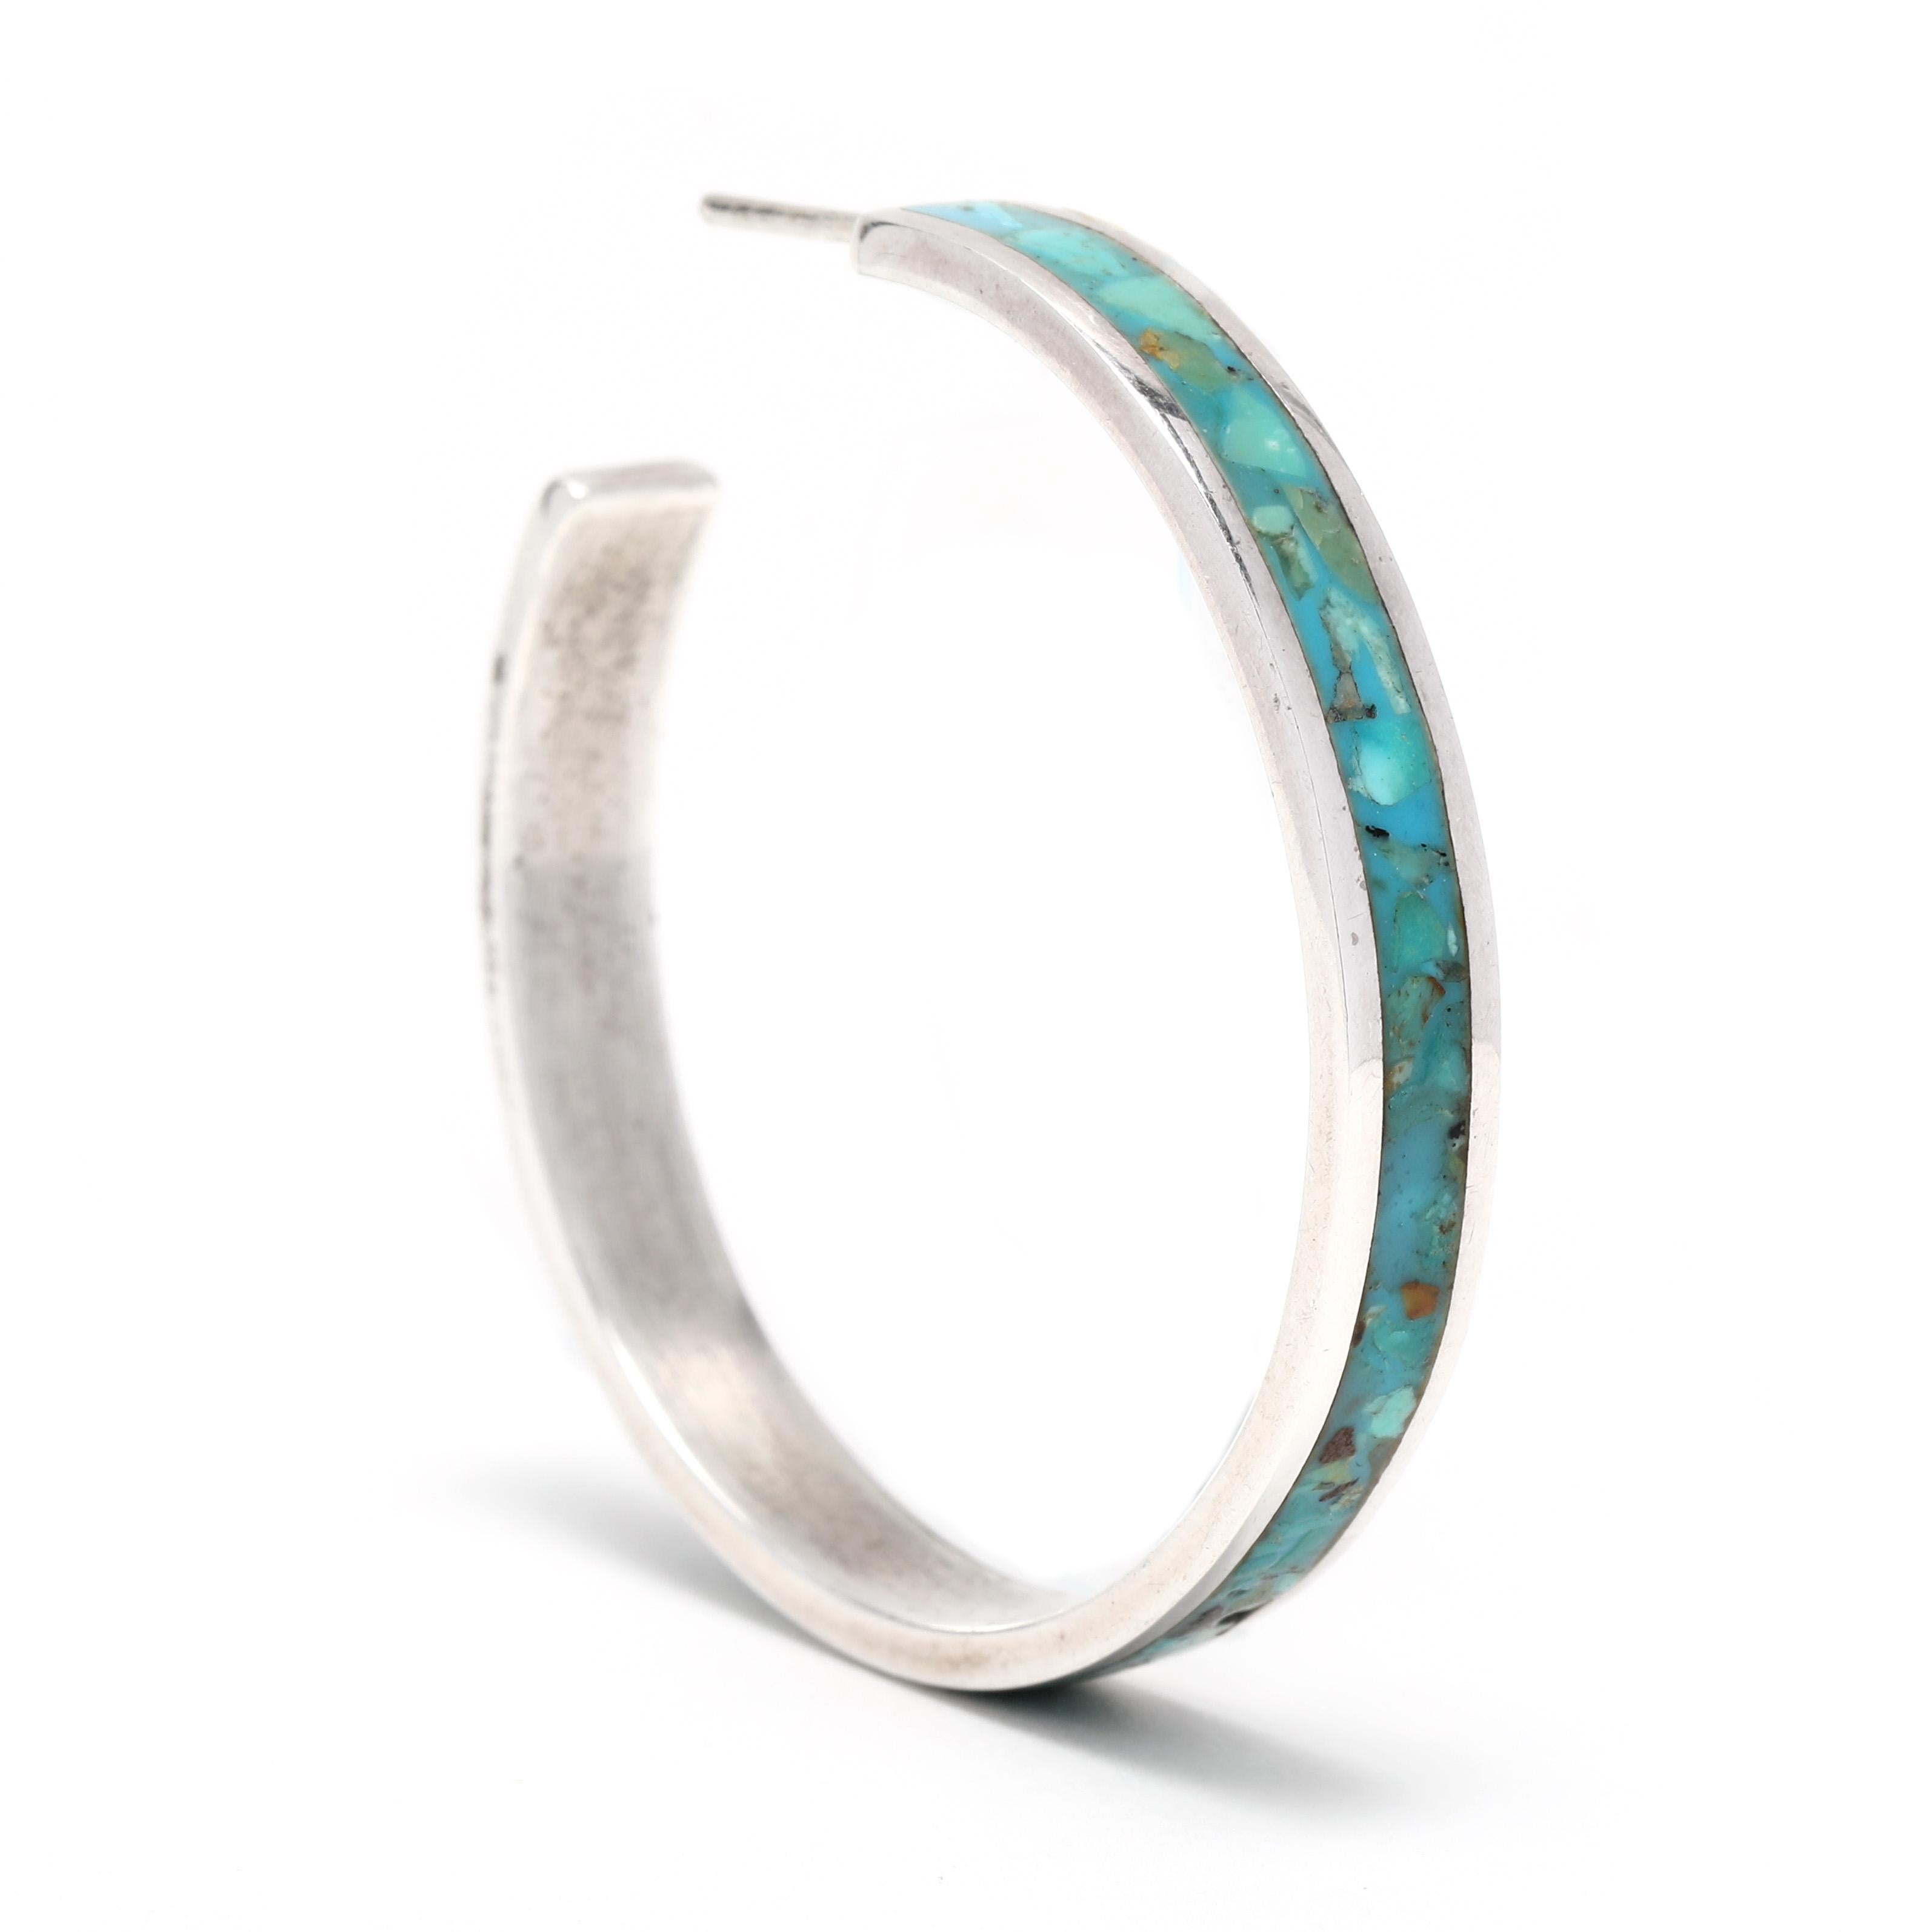 These gorgeous vintage turquoise mosaic hoop earrings are the perfect way to add a touch of southwestern style to any look. Crafted from sterling silver, these earrings feature a vibrant turquoise inlay and measure 1.5 inches in length. The thin